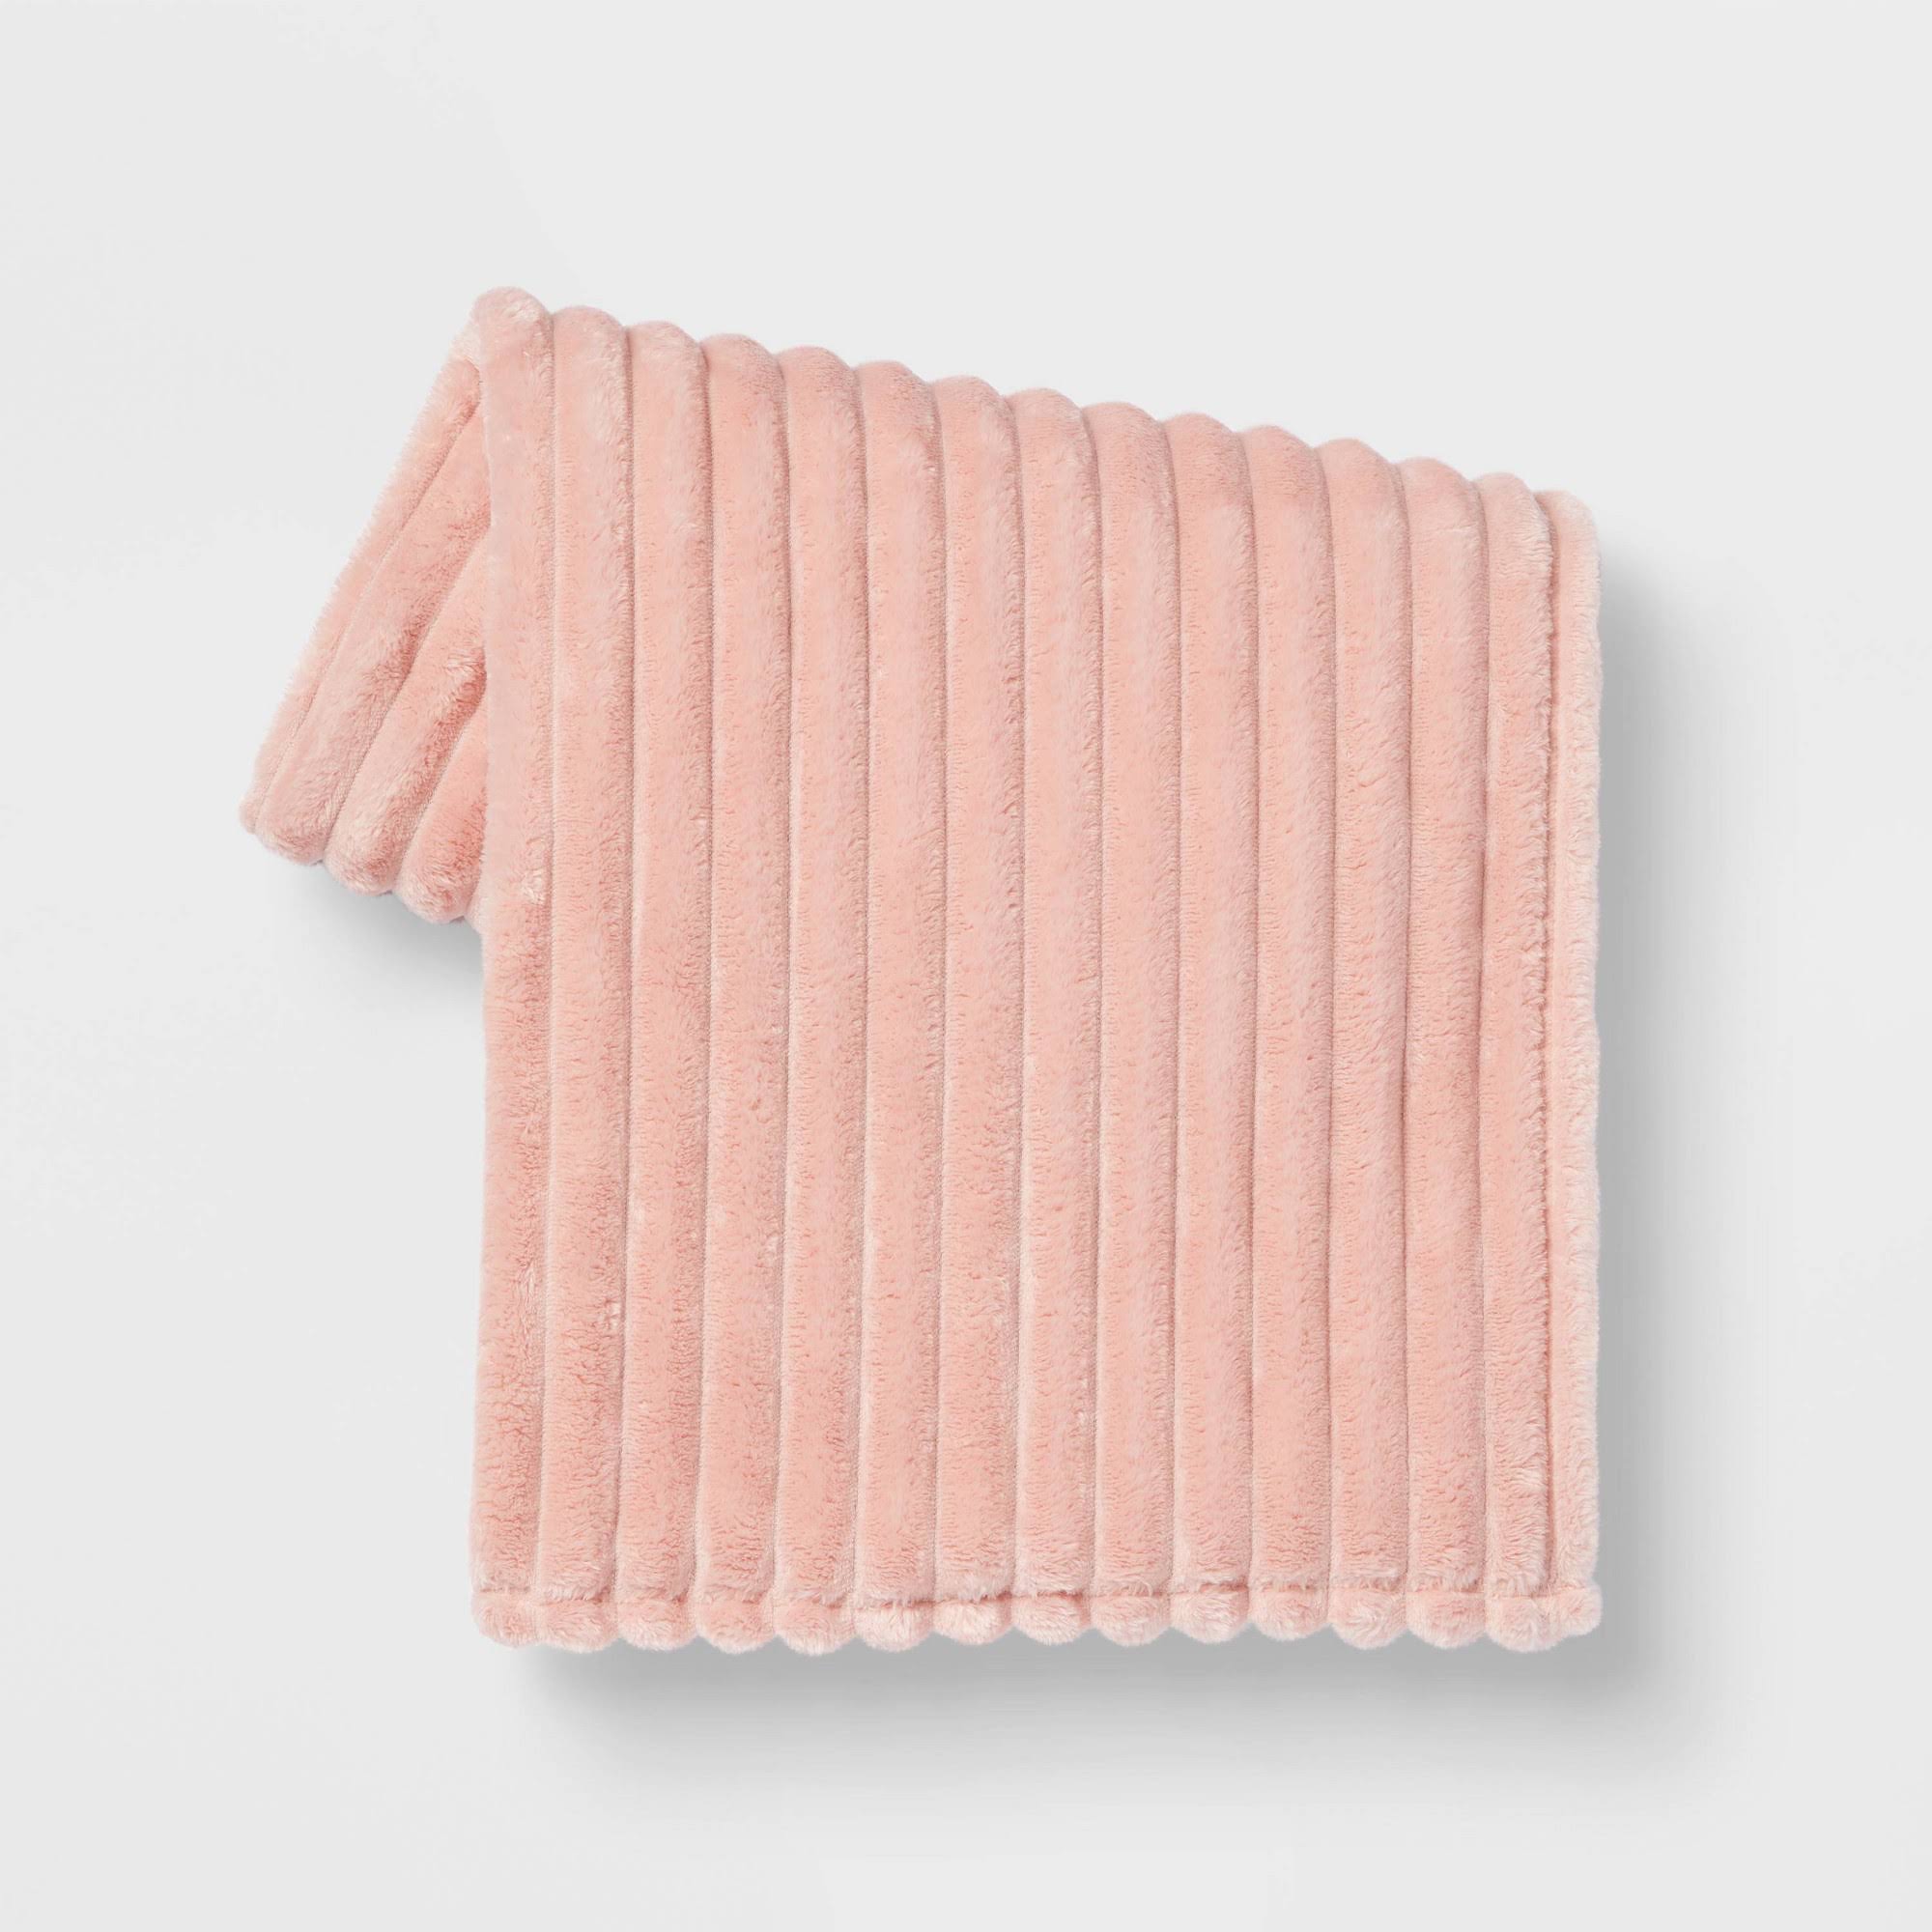 Room Essentials -Ribbed Throw Blanket - 60" X 50" - Blush Pink Home, Office, Garden online marketplace